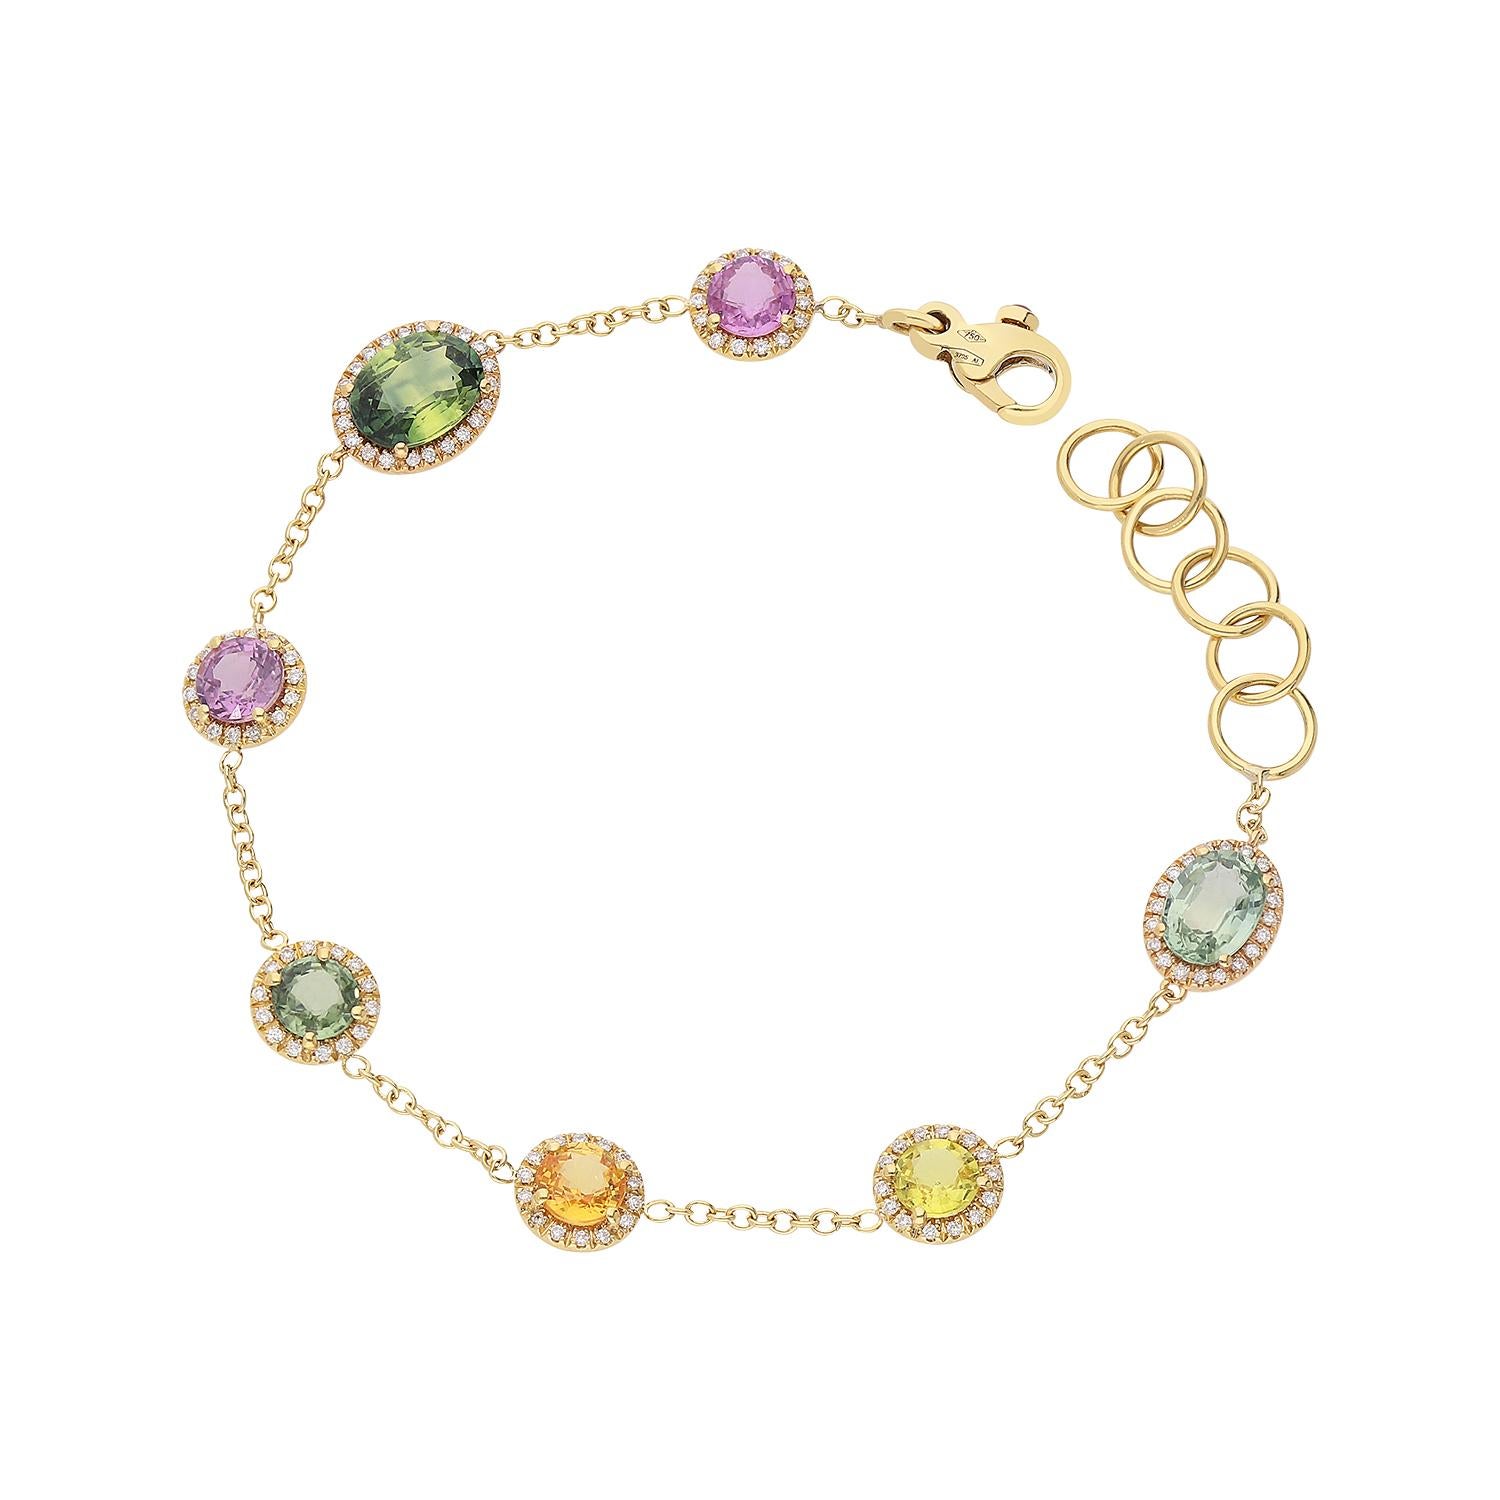 An elegant 18kt yellow gold bracelet with a total weight of 4.80 composed of a chain with equally spaced elements. Each element consists of a multi-color round- or oval-cut sapphire surrounded by brilliant-cut diamonds, color G SI clarity. Sapphires